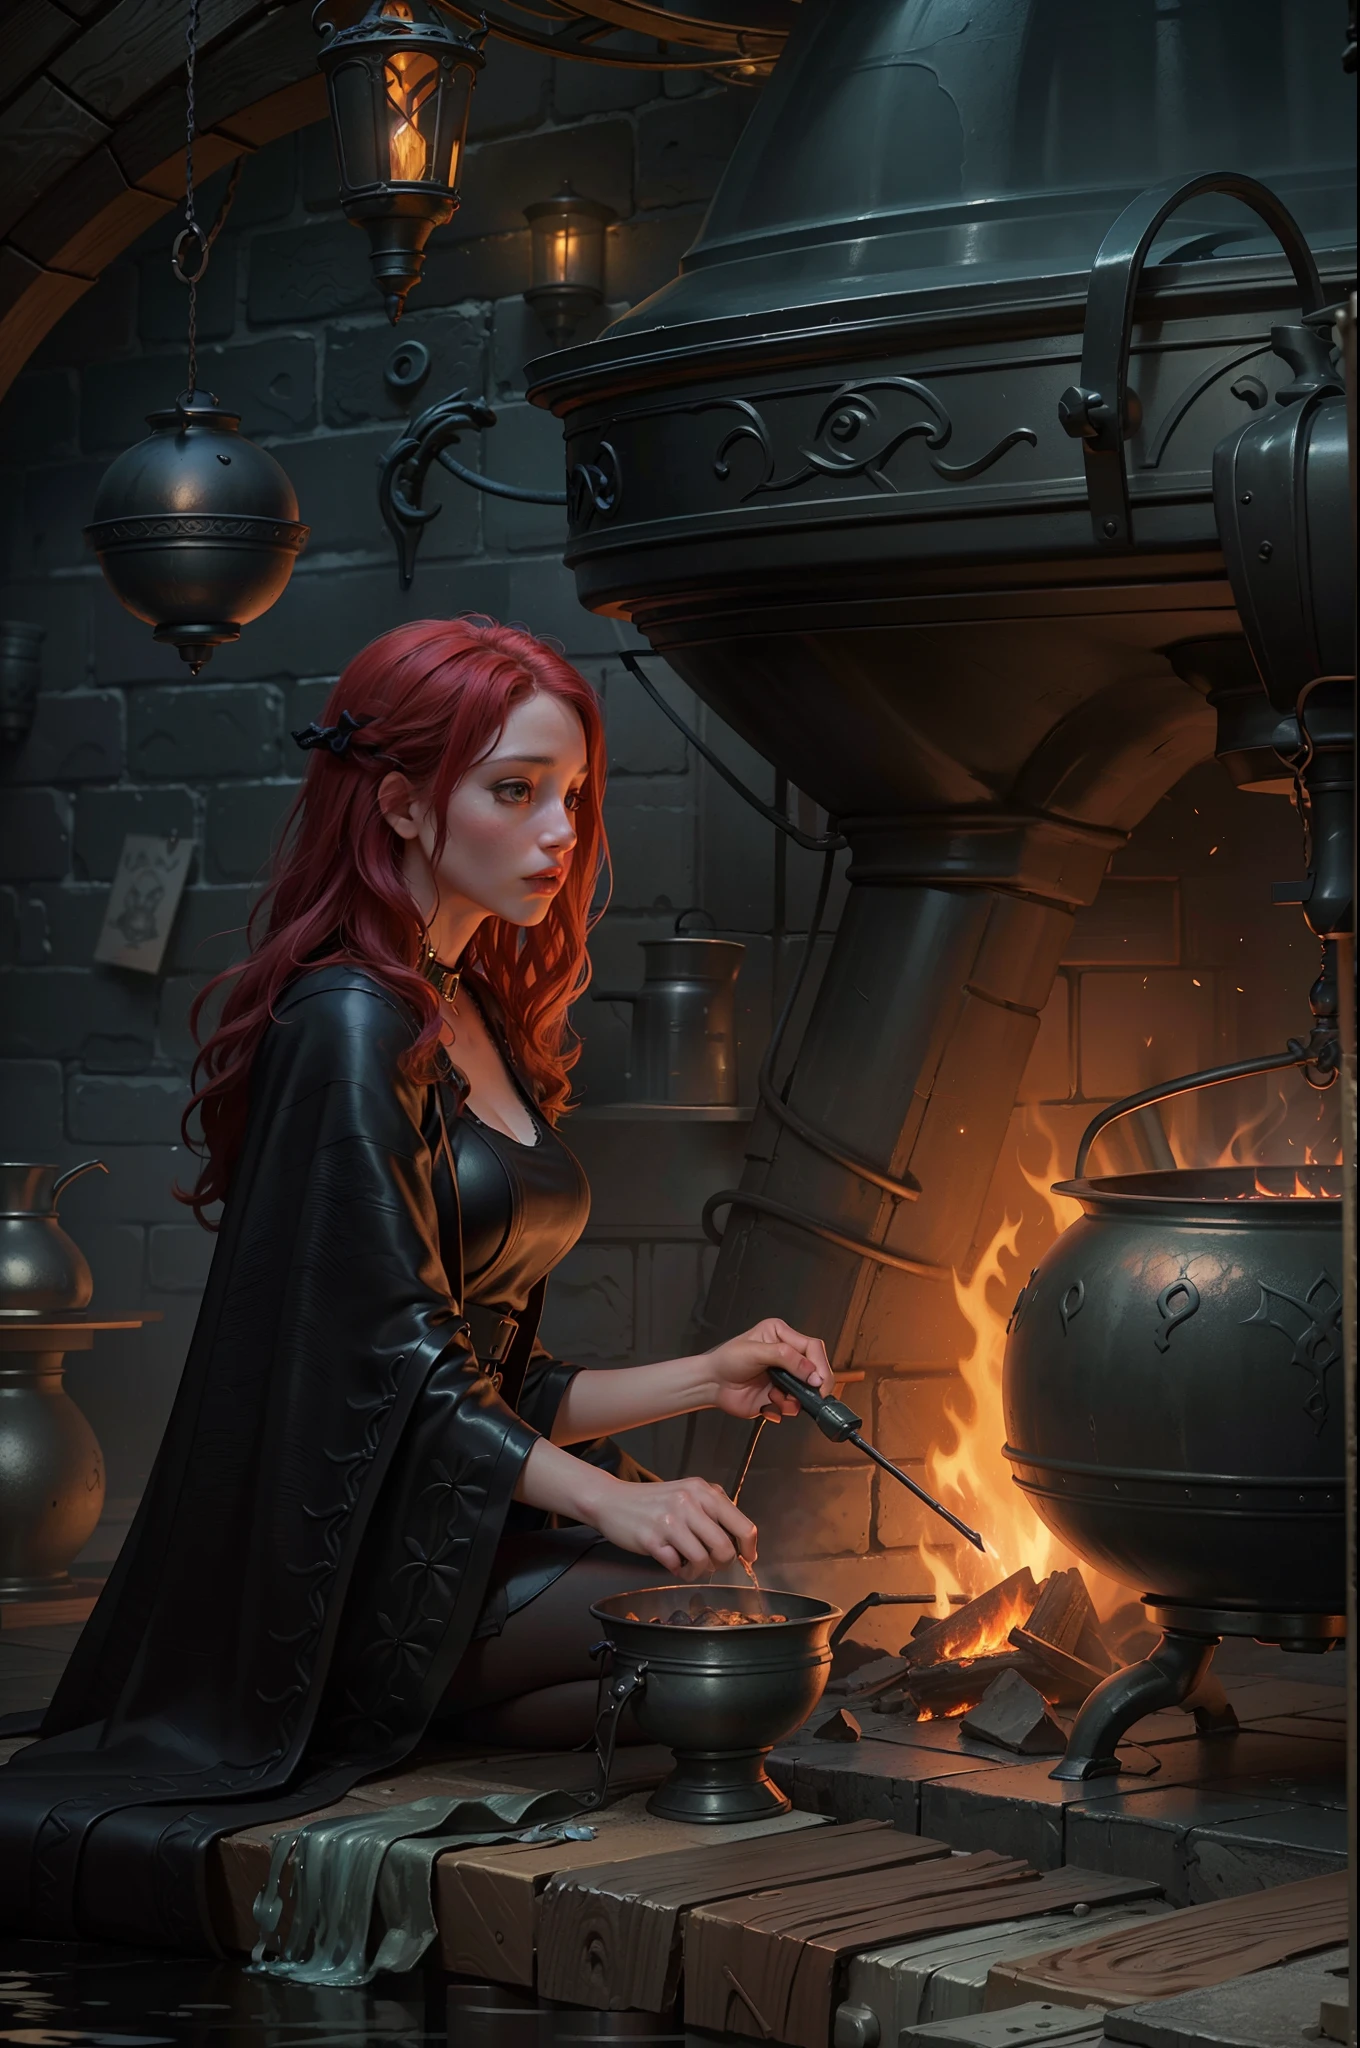 high details, best quality, 16k, RAW, [best detailed], masterpiece, best quality, (extremely detailed), full body (best details, Masterpiece, best quality), , ultra wide shot, photorealistic, fantasy art, RPG art, D&D art, a picture of a woman, witch brweing dark matter over big cauldron in the fire place, middle aged woman, exquisite beautiful woman (best details, Masterpiece, best quality), ultra detailed face (best details, Masterpiece, best quality), red hair, long hair, wavy hair, dynamic eye color, pale skin, black dress (best details, Masterpiece, best quality), wearing black boots, large boilng cauldron, black cauldron, green mists GlowingRunes_green, coming from cauldron, a stove, middles ages house background, dim fire light, High Detail, Ultra High Quality, High Resolution, 16K Resolution, Ultra HD Pictures, 3D rendering Ultra Realistic, Clear Details, Realistic Detail, Ultra High Definition Waiting to start